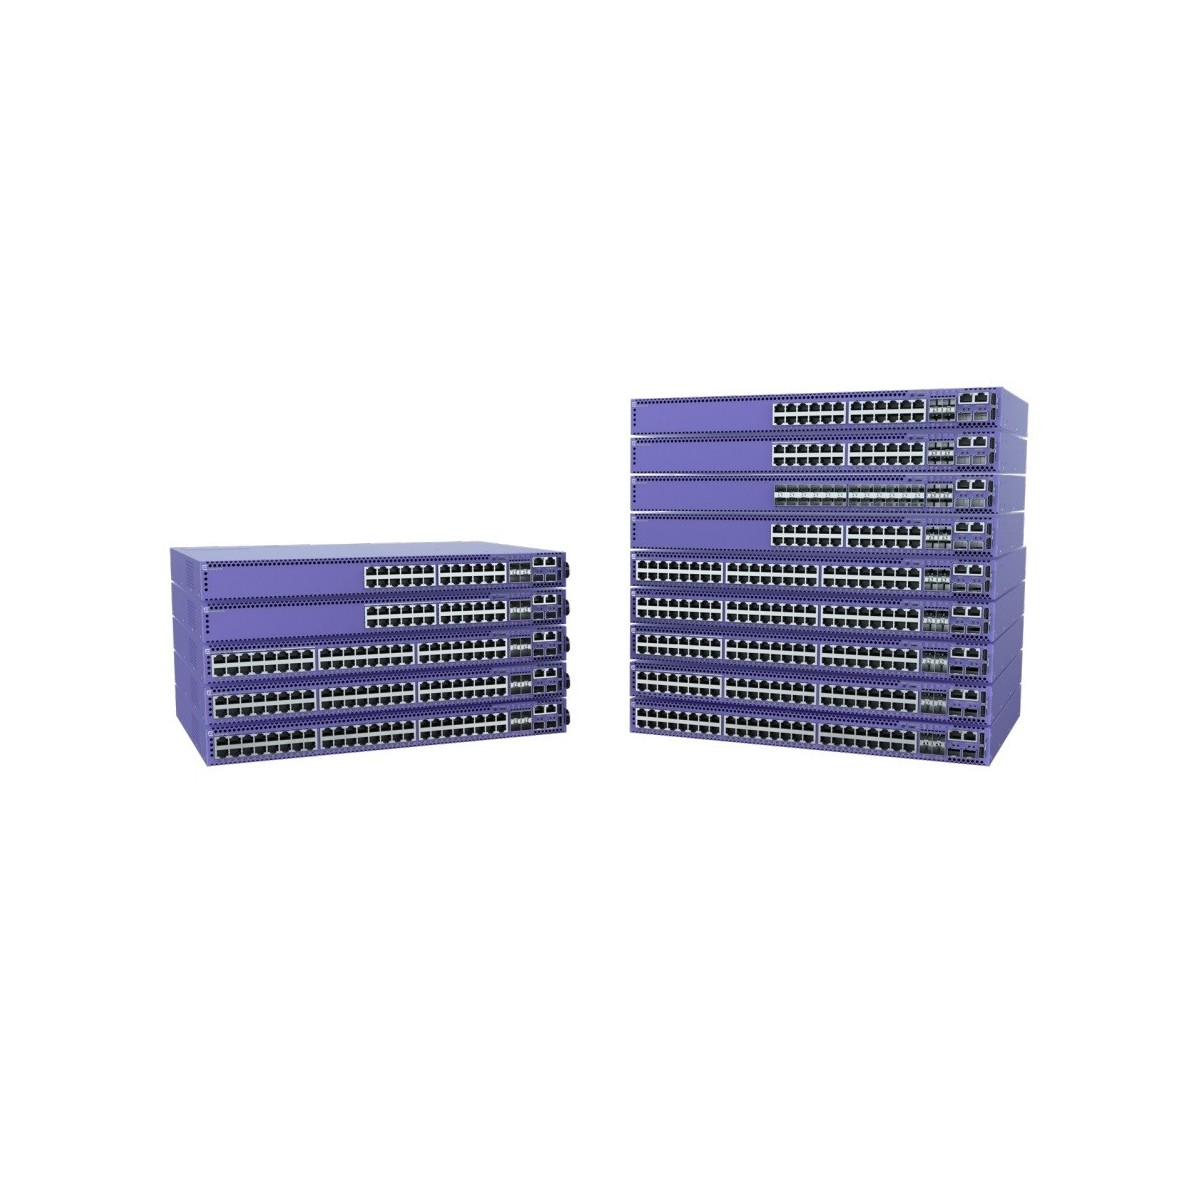 Extreme Networks ExtremeSwitching 5420M 48 FDX/HDX 2 4 fa - Switch - 1 Gbps